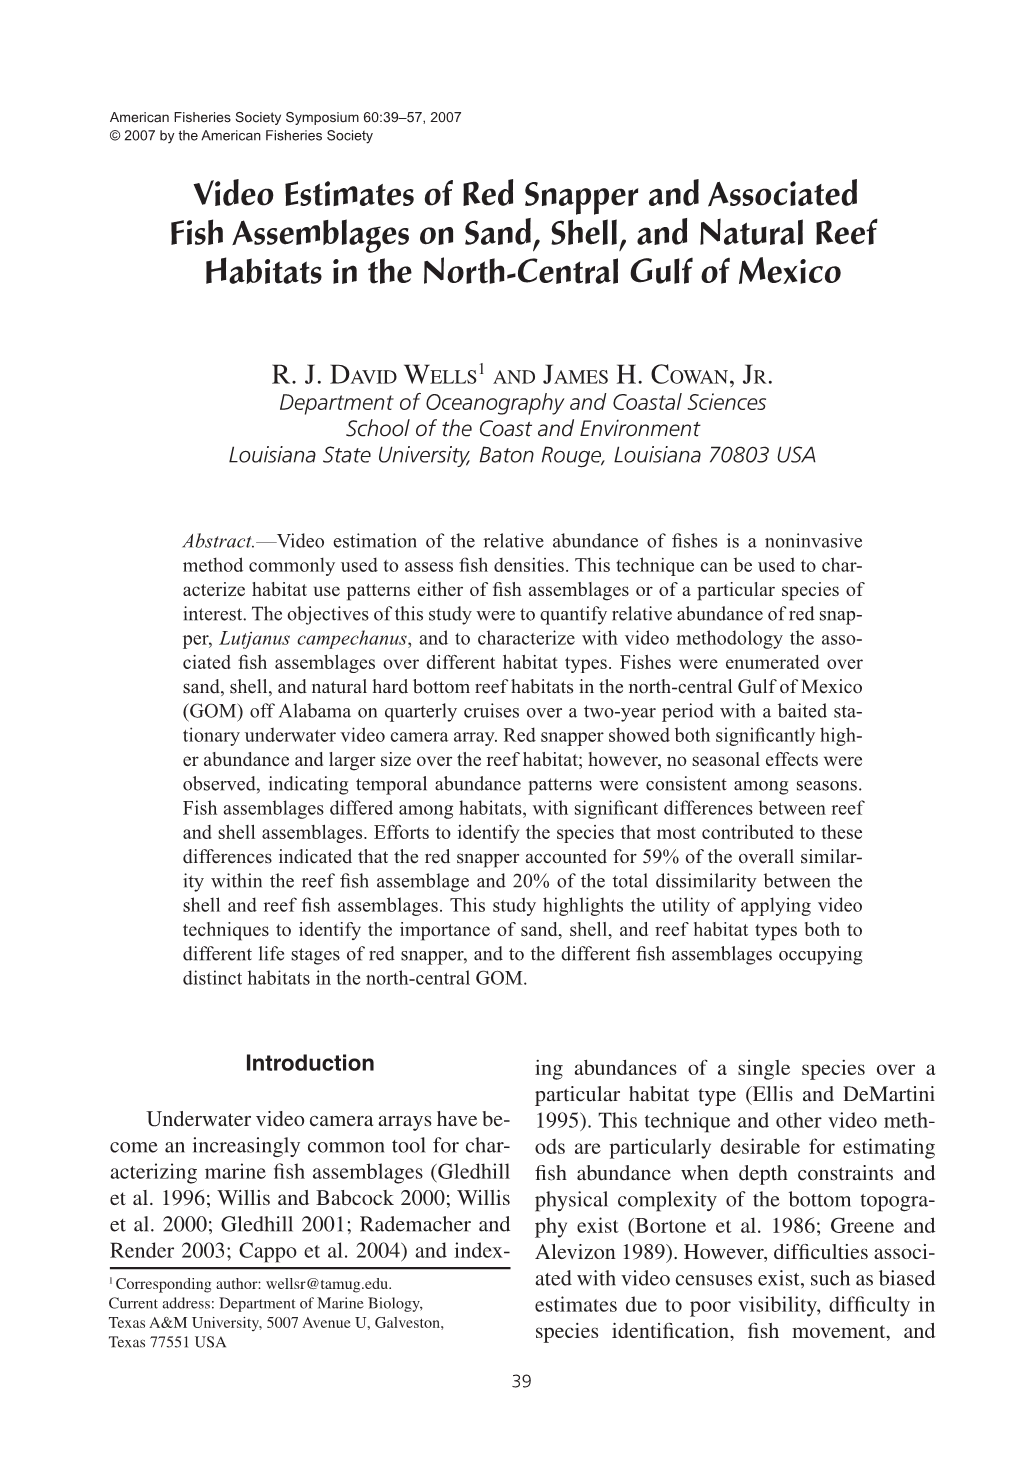 Video Estimates of Red Snapper and Associated Fish Assemblages on Sand, Shell, and Natural Reef Habitats in the North-Central Gulf of Mexico